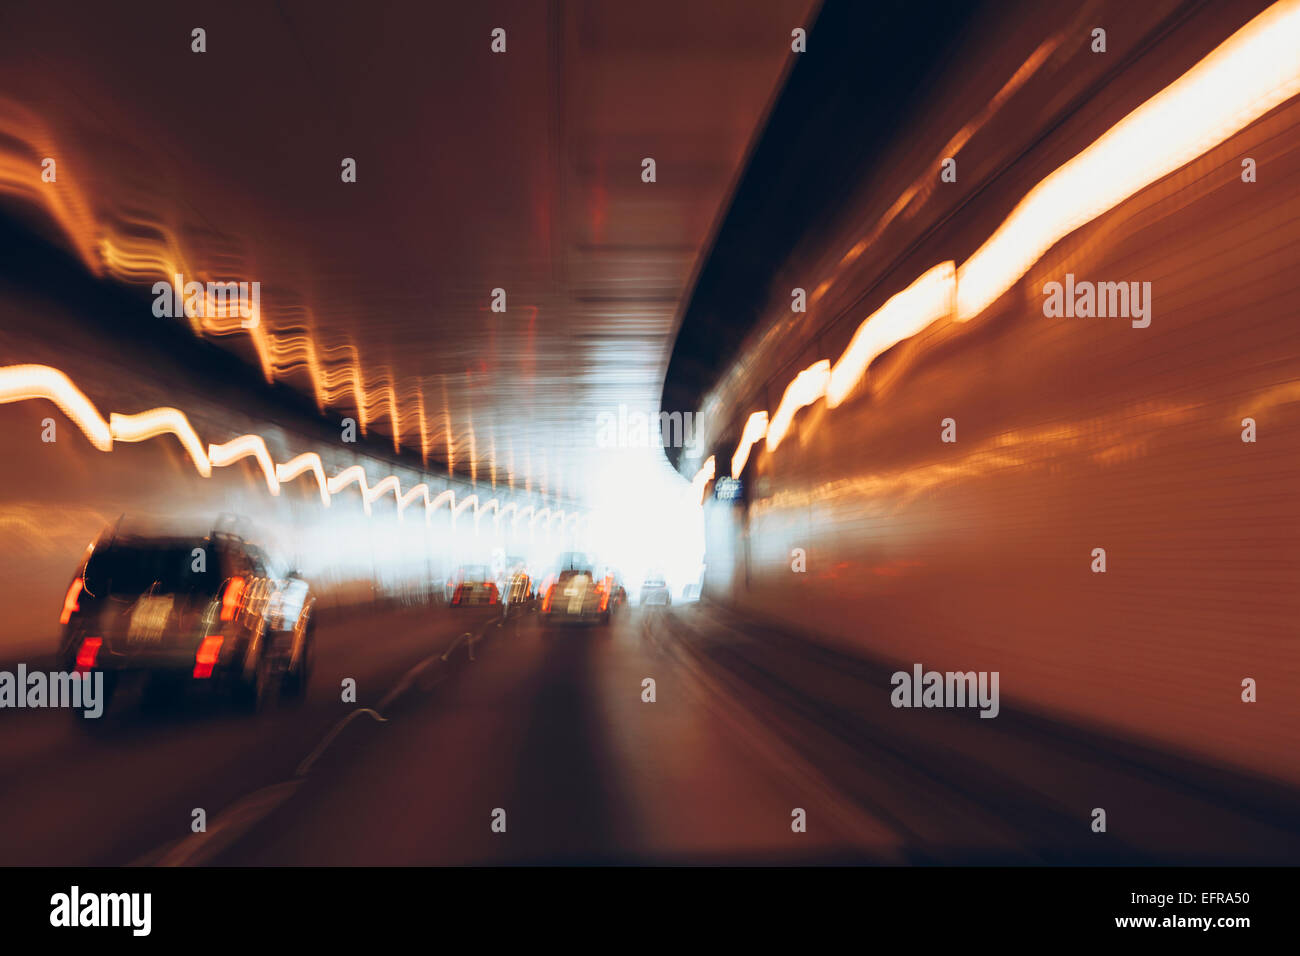 Cars driving through tunnel, long exposure Stock Photo